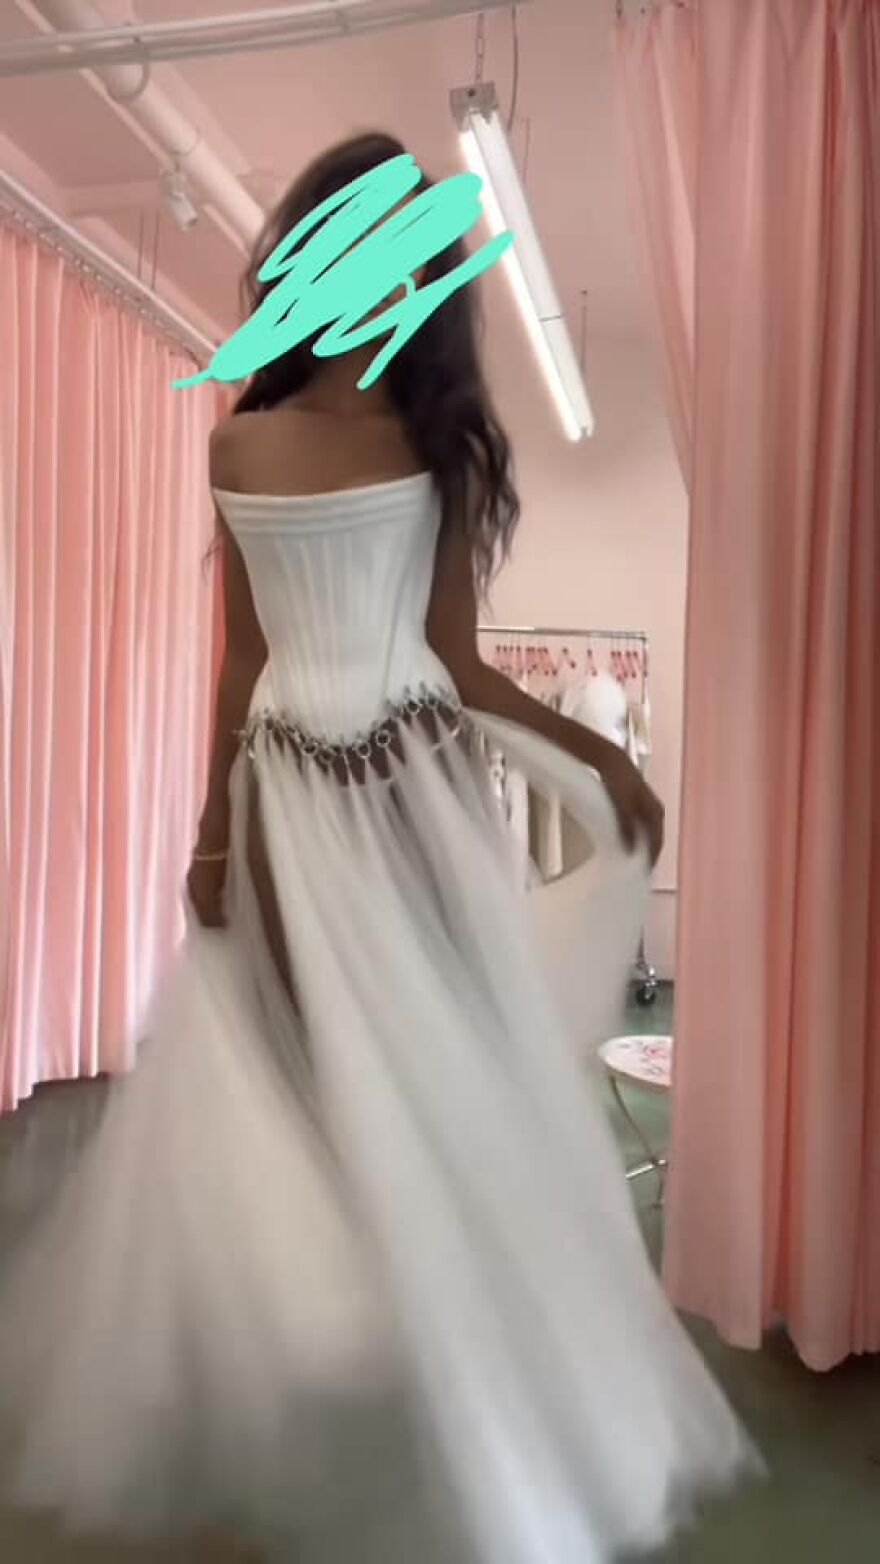 The Video Was Moving Pretty Fast So Apologies The Screenshots Aren’t The Best. I Knew From The Second I Saw The Word “Modern” I’d Hate Them 🫠🫠 If It Was Red Maybe The Bow One Would Be Okay For A Christmas Party Or Something But For A Weddinnng??? 😩